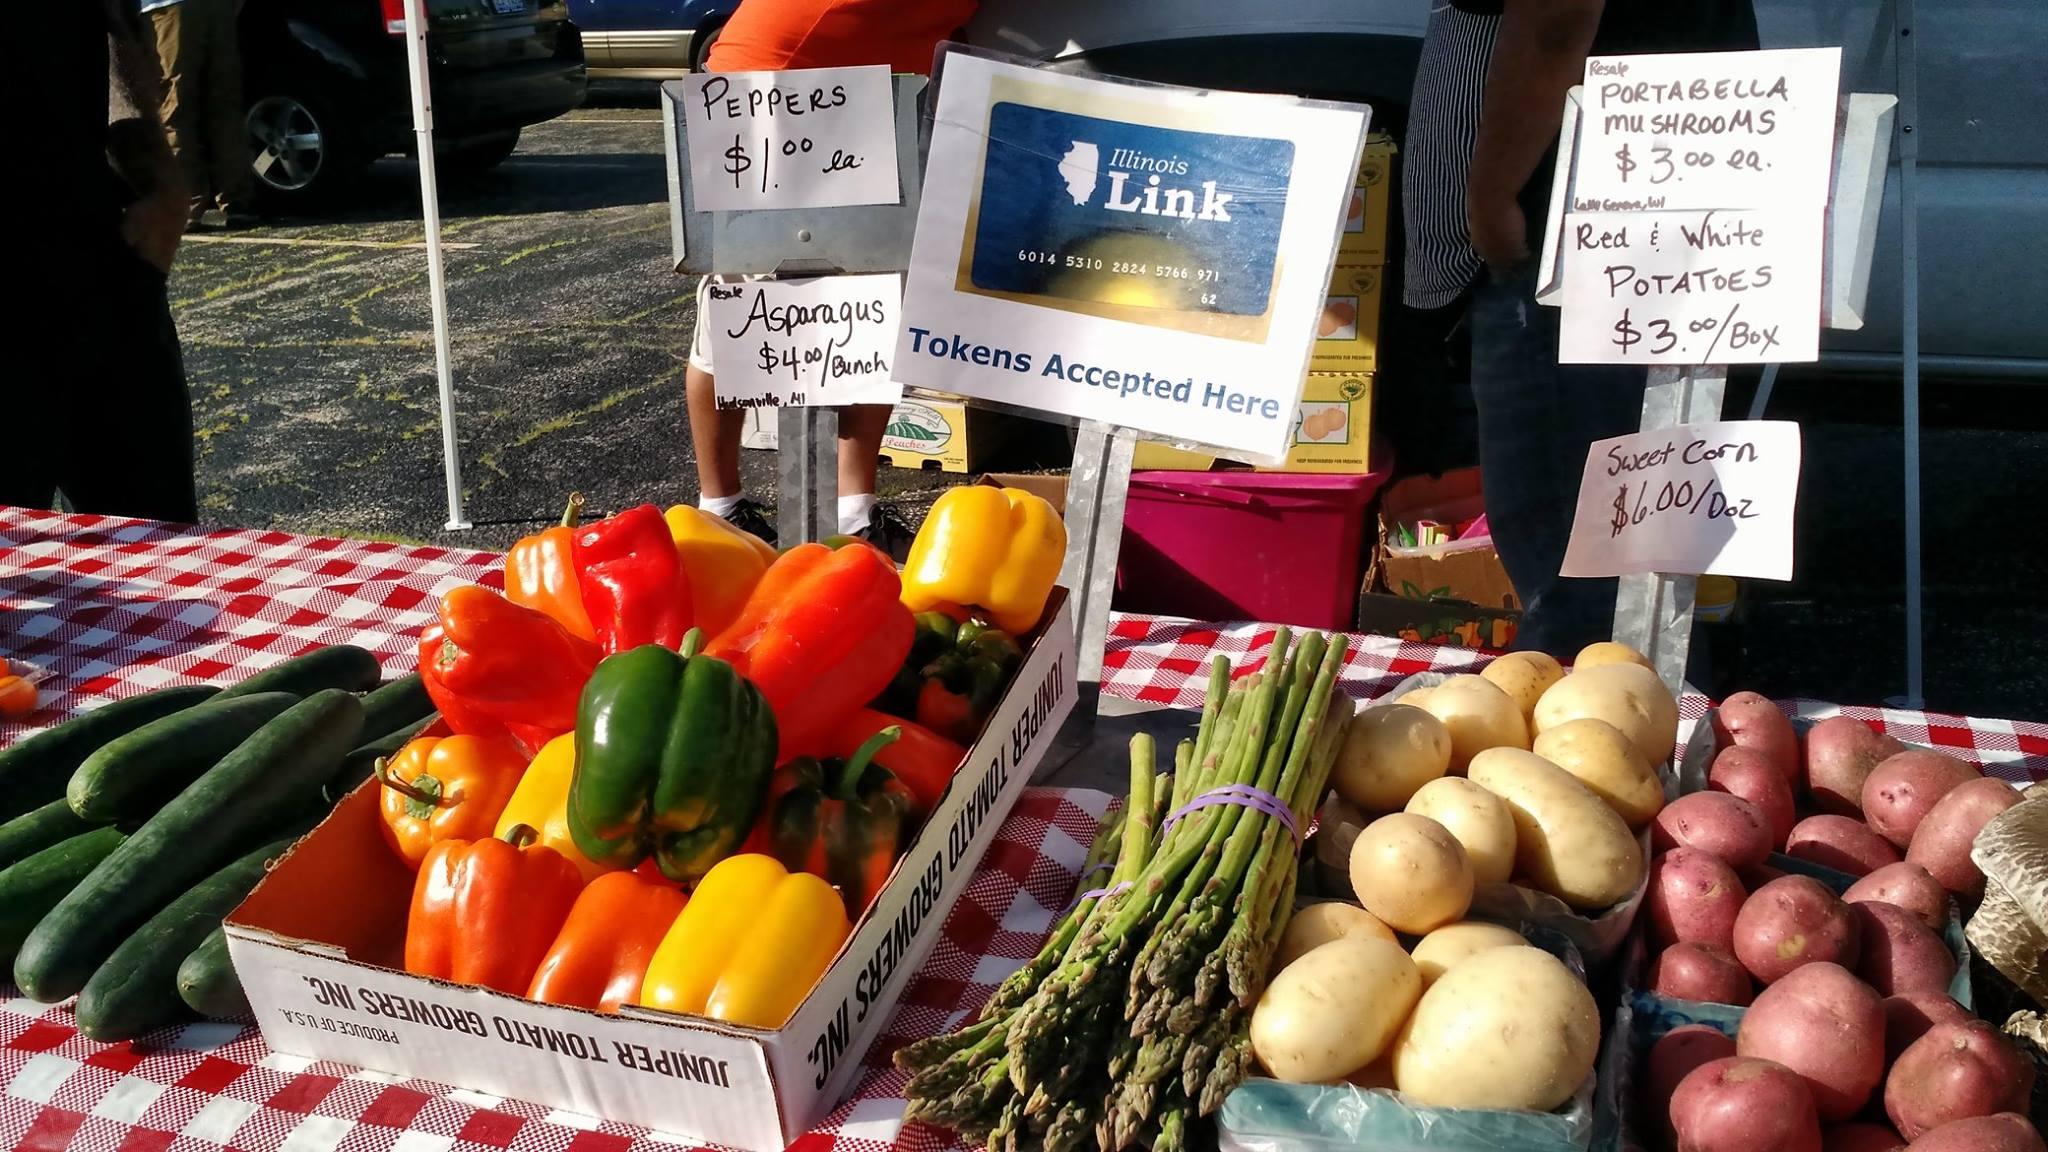  More than 40 farmers markets in Chicago accept payment with the Illinois Link card. (Illinois Farmers Market Alliance / Facebook)